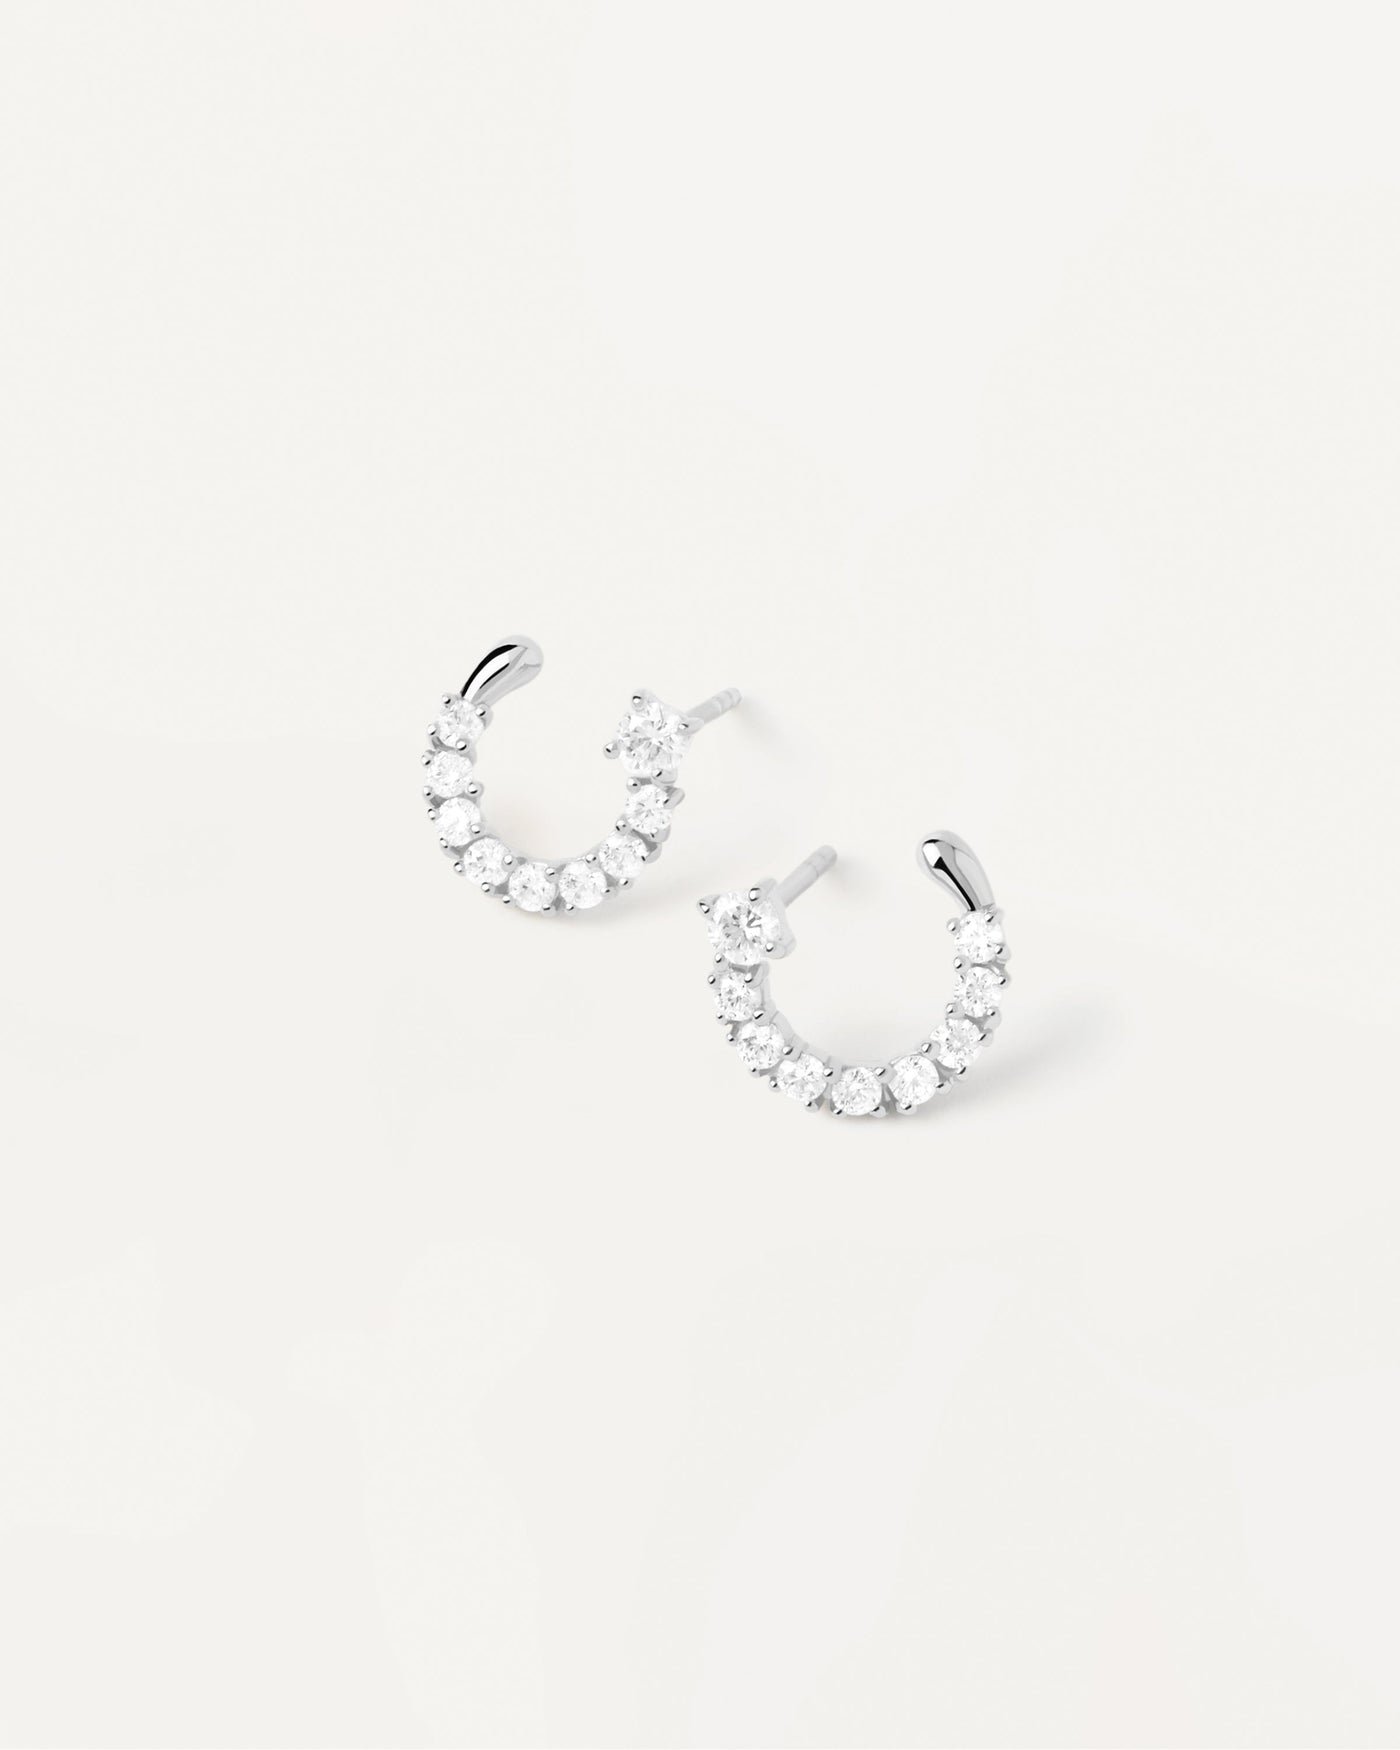 2023 Selection | Leona Silver Earrings. Semi-circle small earrings in sterling silver with white crystals. Get the latest arrival from PDPAOLA. Place your order safely and get this Best Seller. Free Shipping.